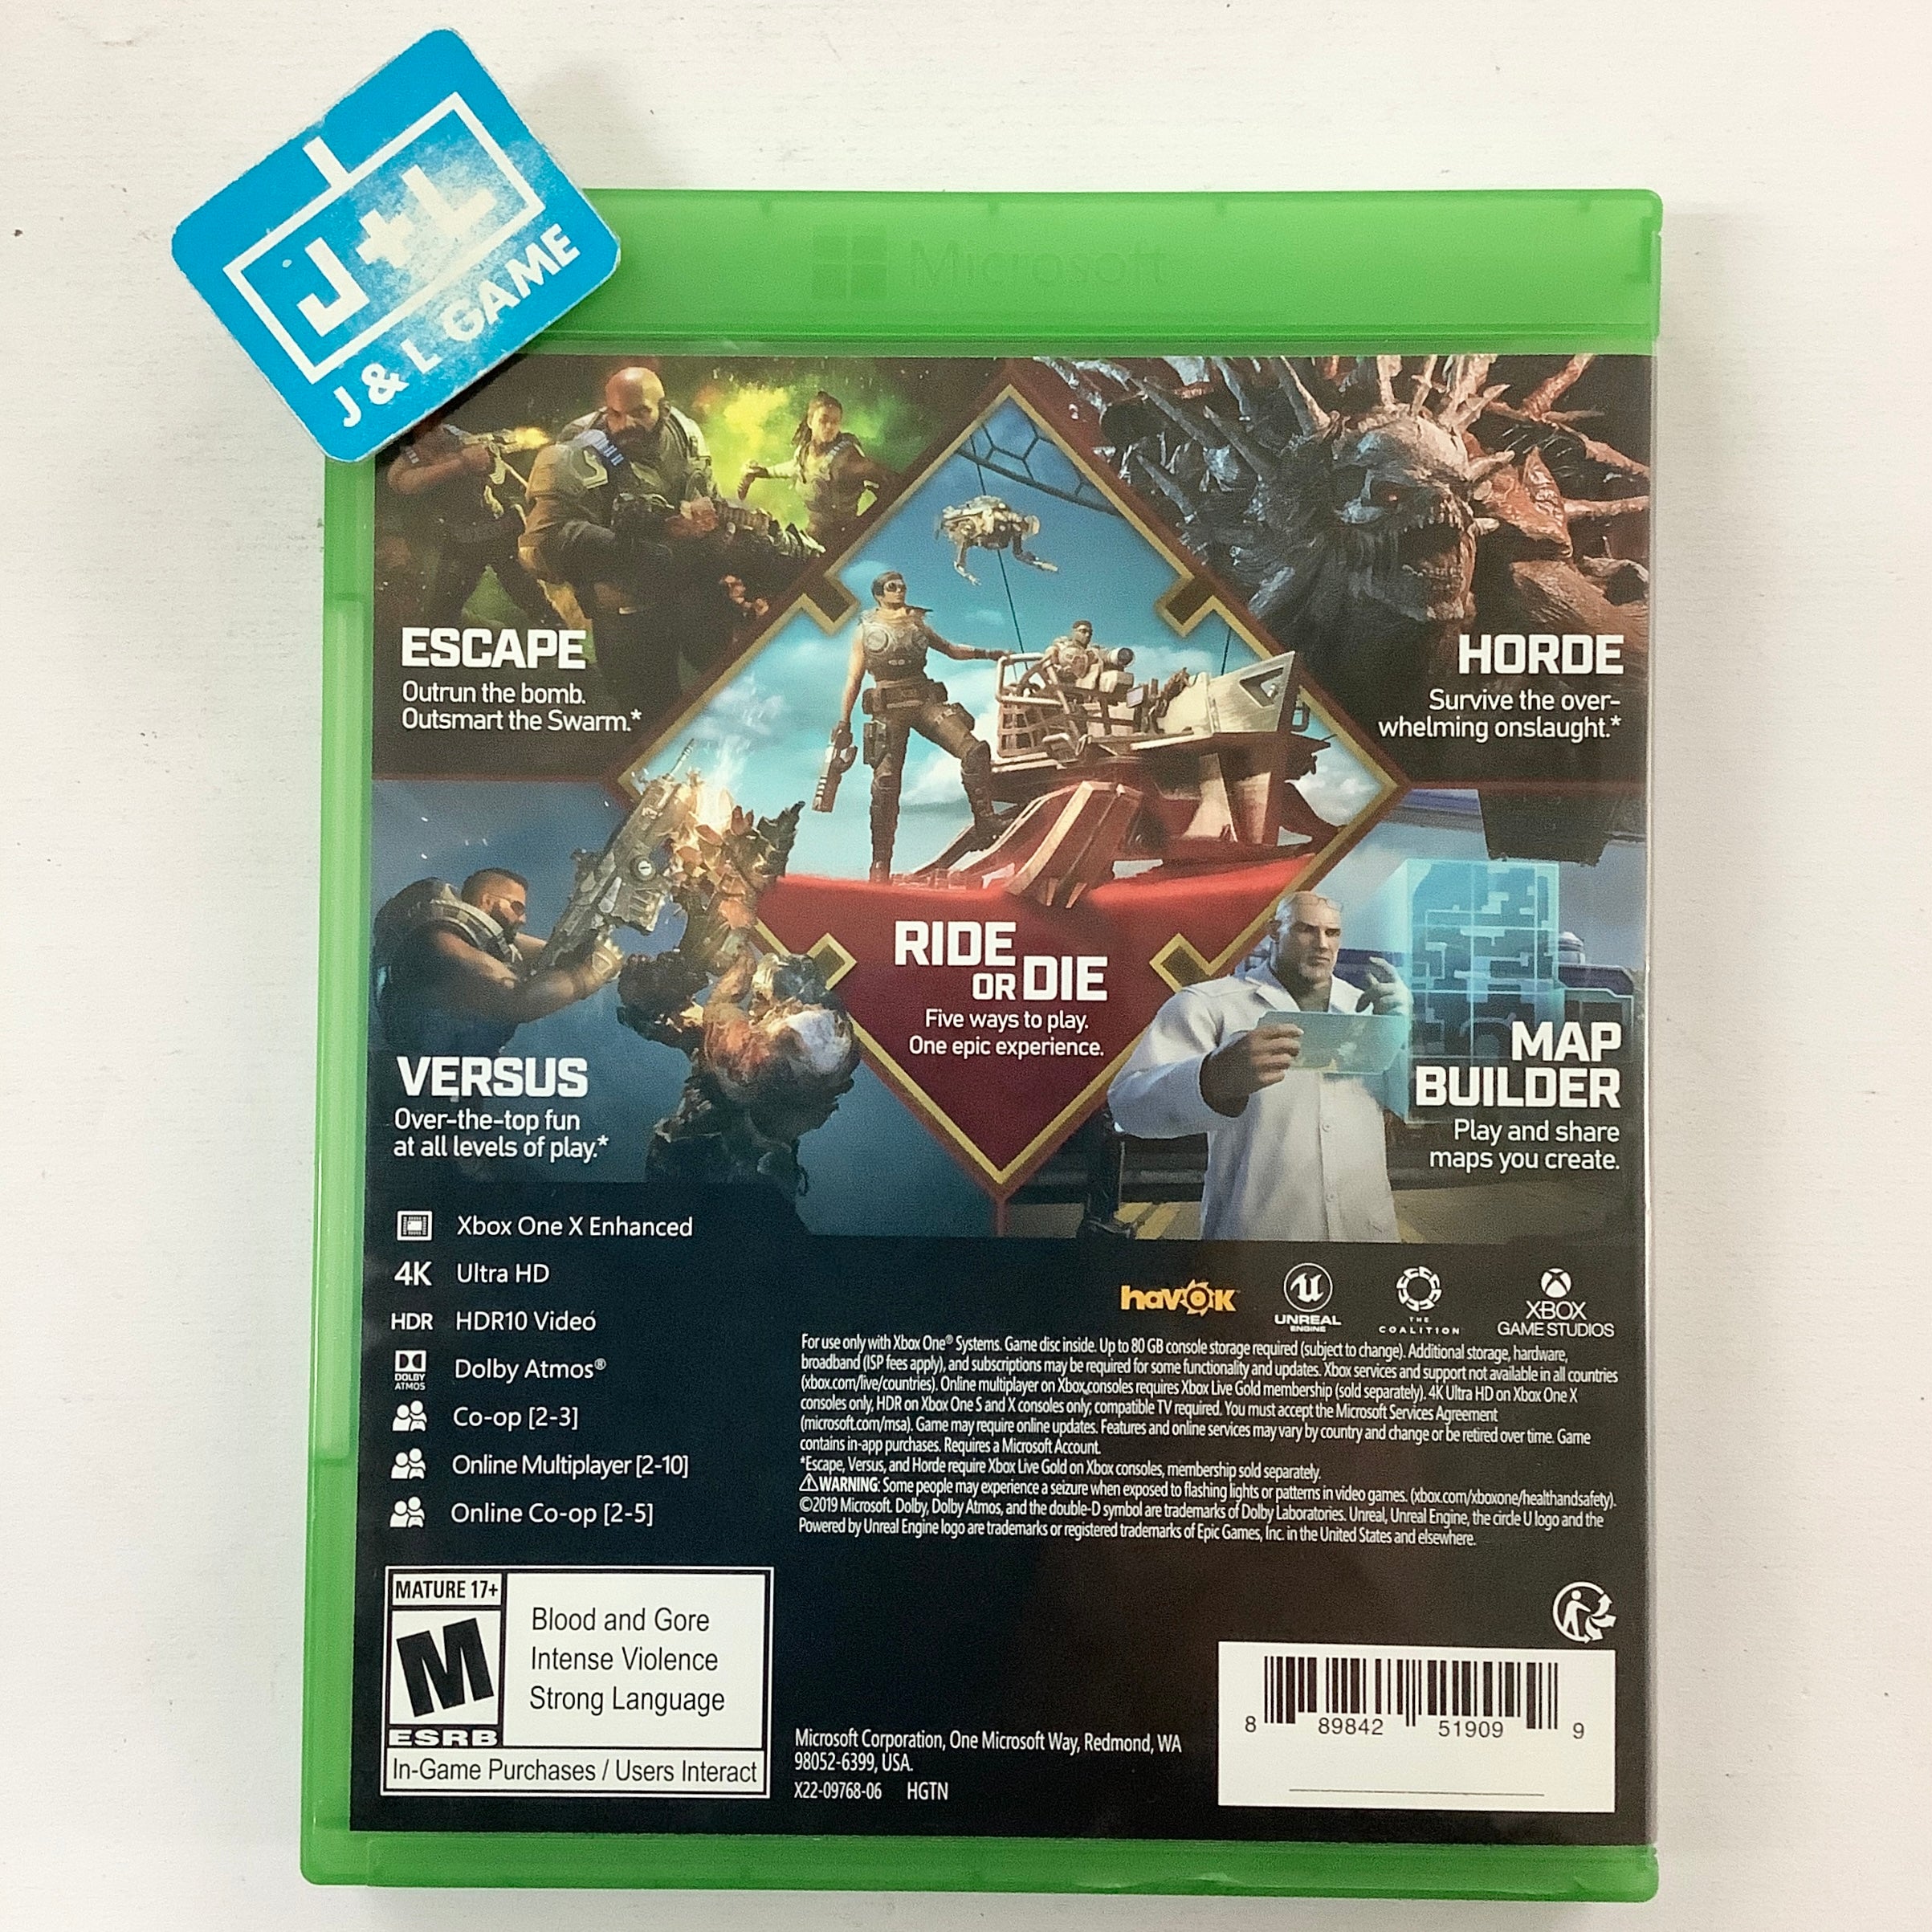 Gears 5 - (XB1) Xbox One [Pre-Owned] Video Games Microsoft   